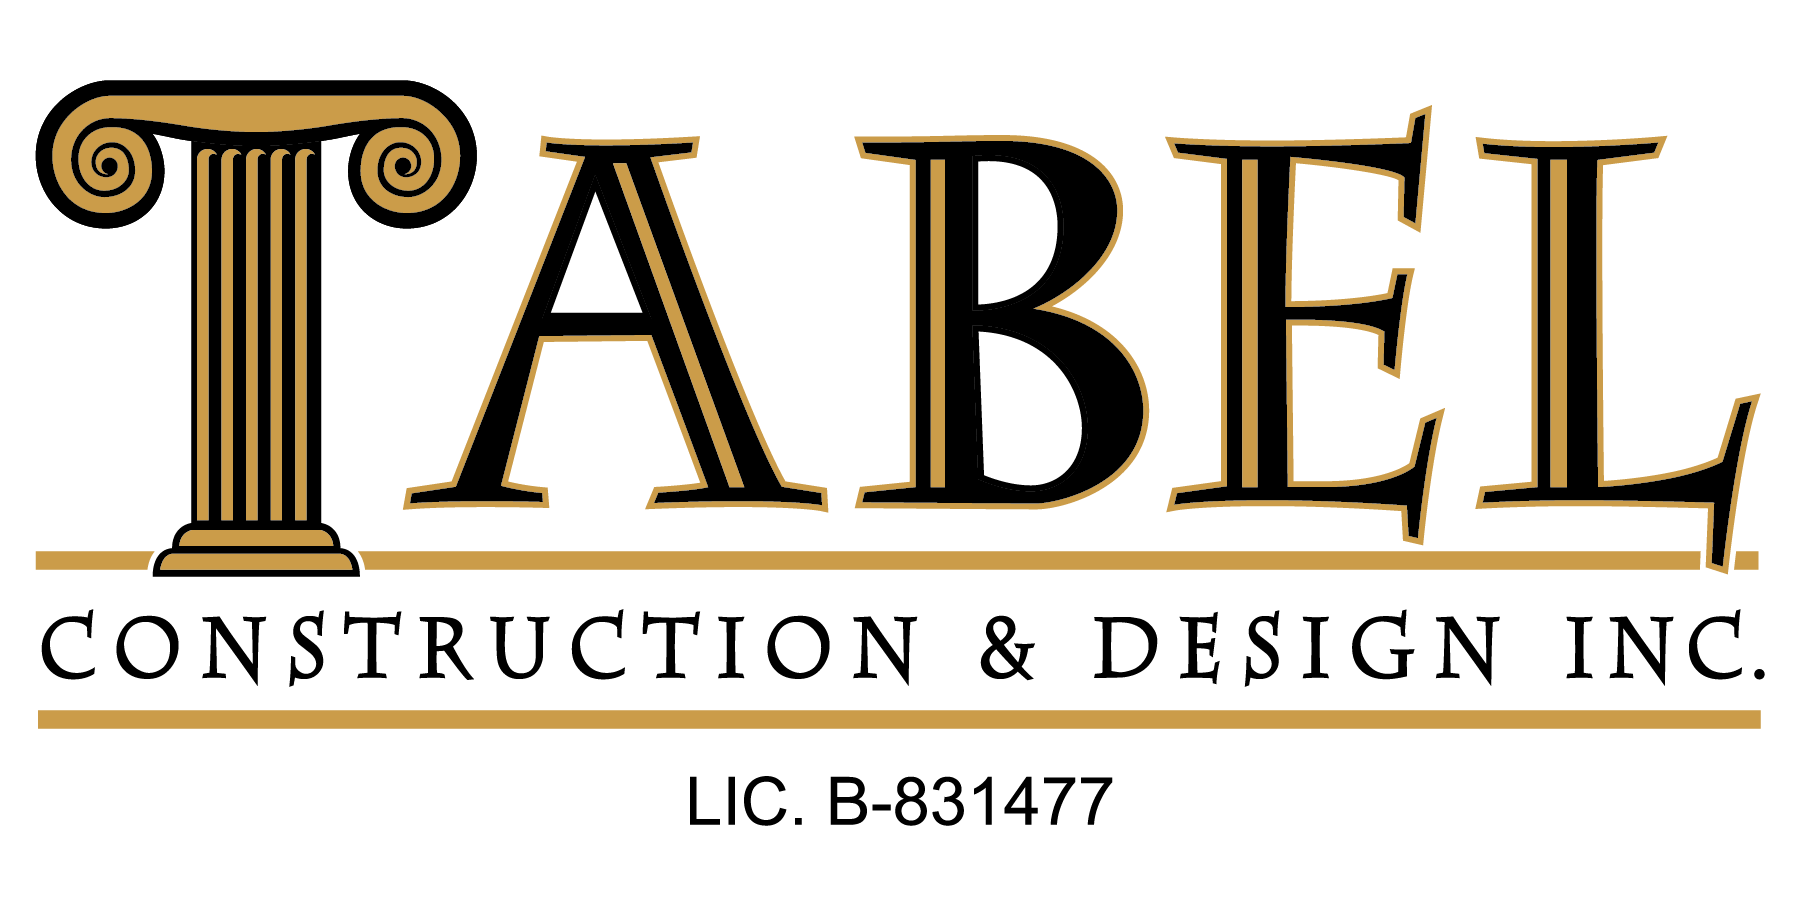 Tabel Construction and Design, Inc.